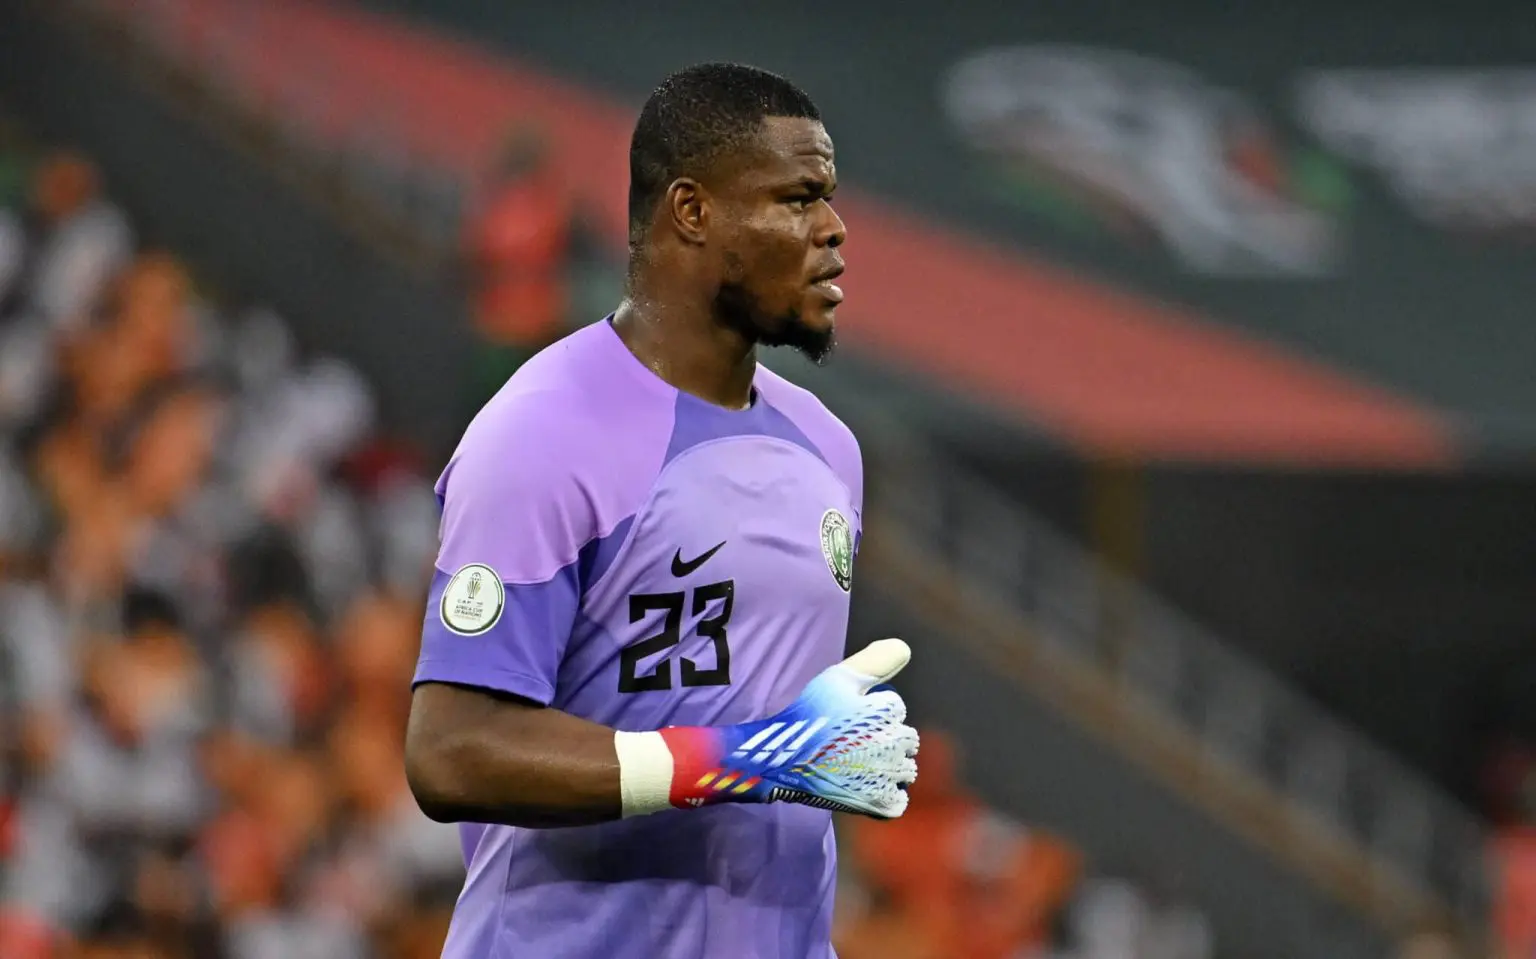 Transfer: Two clubs confirm interest in signing Super Eagles goalkeeper, Nwabali